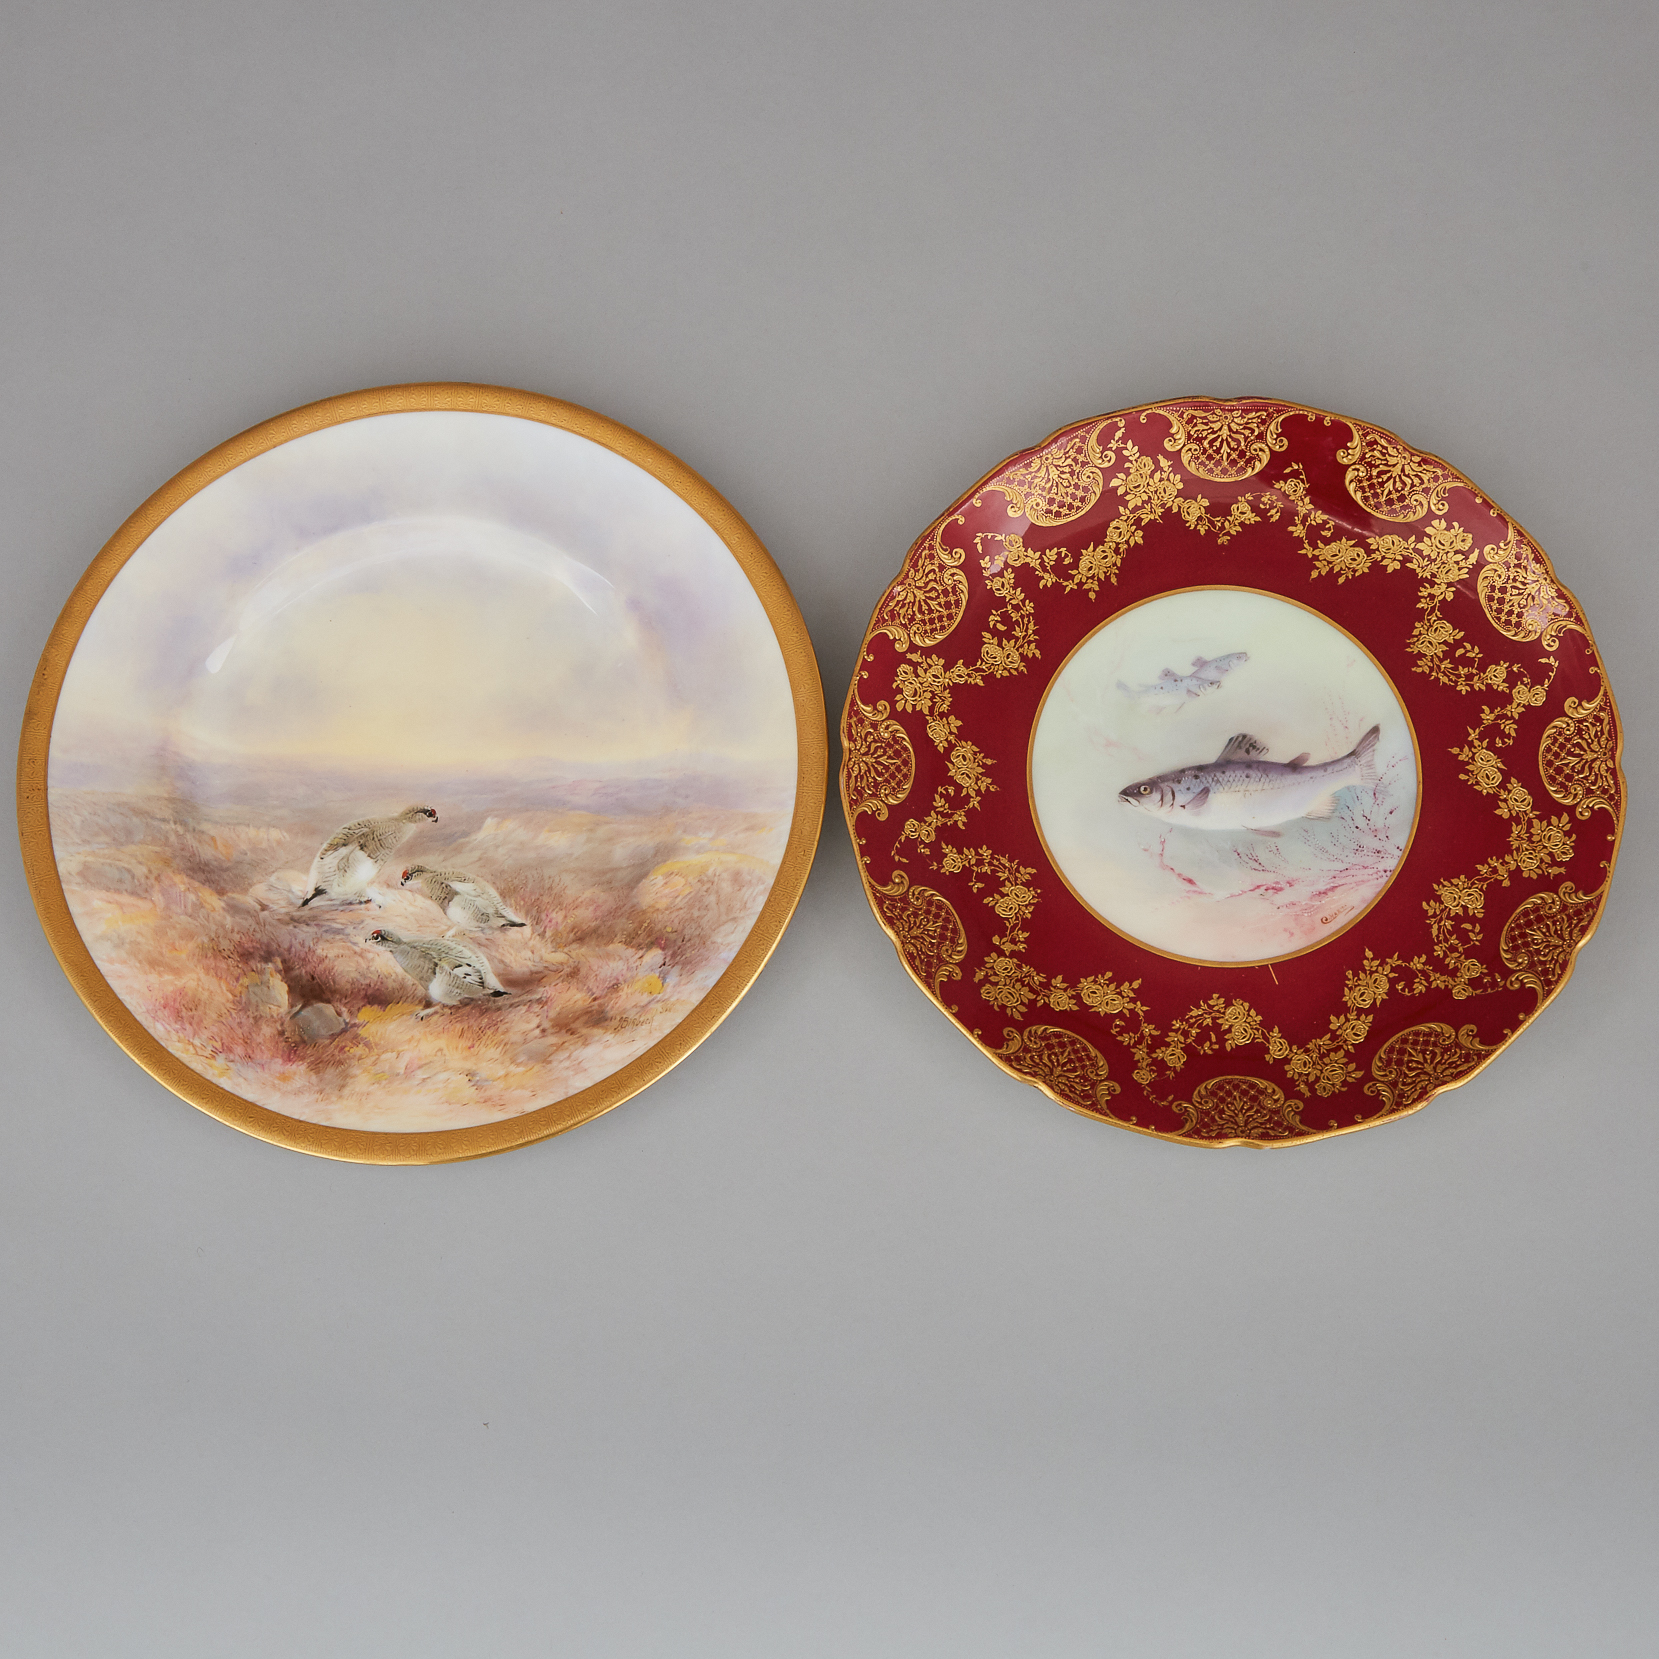 Royal Doulton Game Plate and a Fish Plate, Joseph Birbeck and Charles Hart, early 20th century